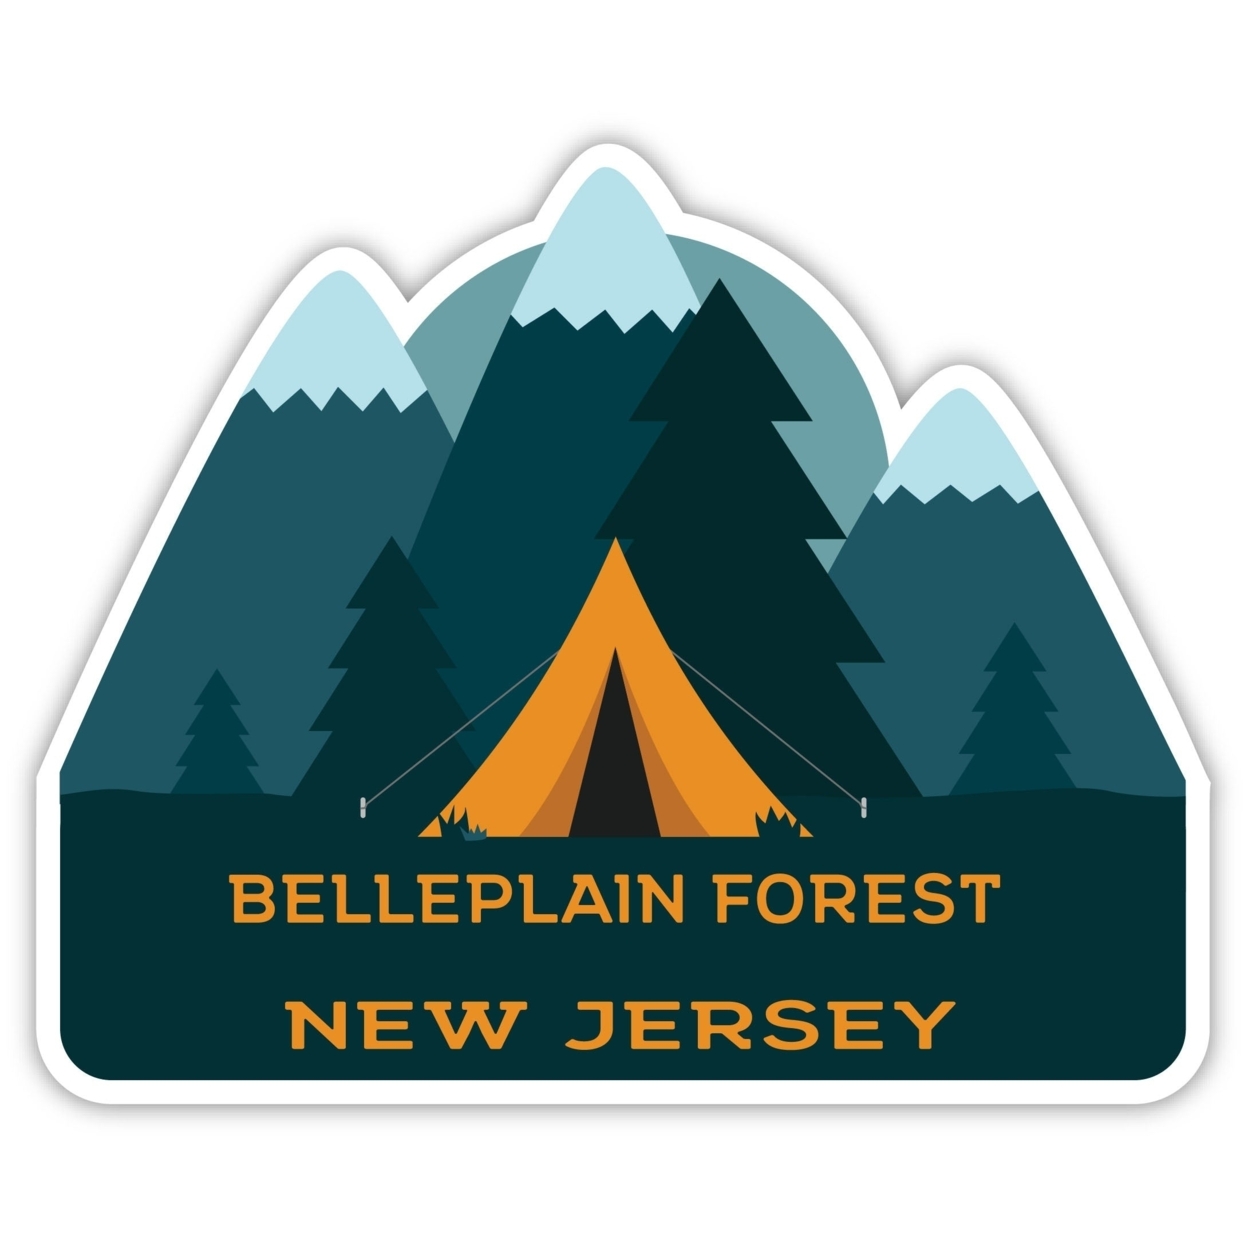 Belleplain Forest New Jersey Souvenir Decorative Stickers (Choose Theme And Size) - 4-Pack, 8-Inch, Tent